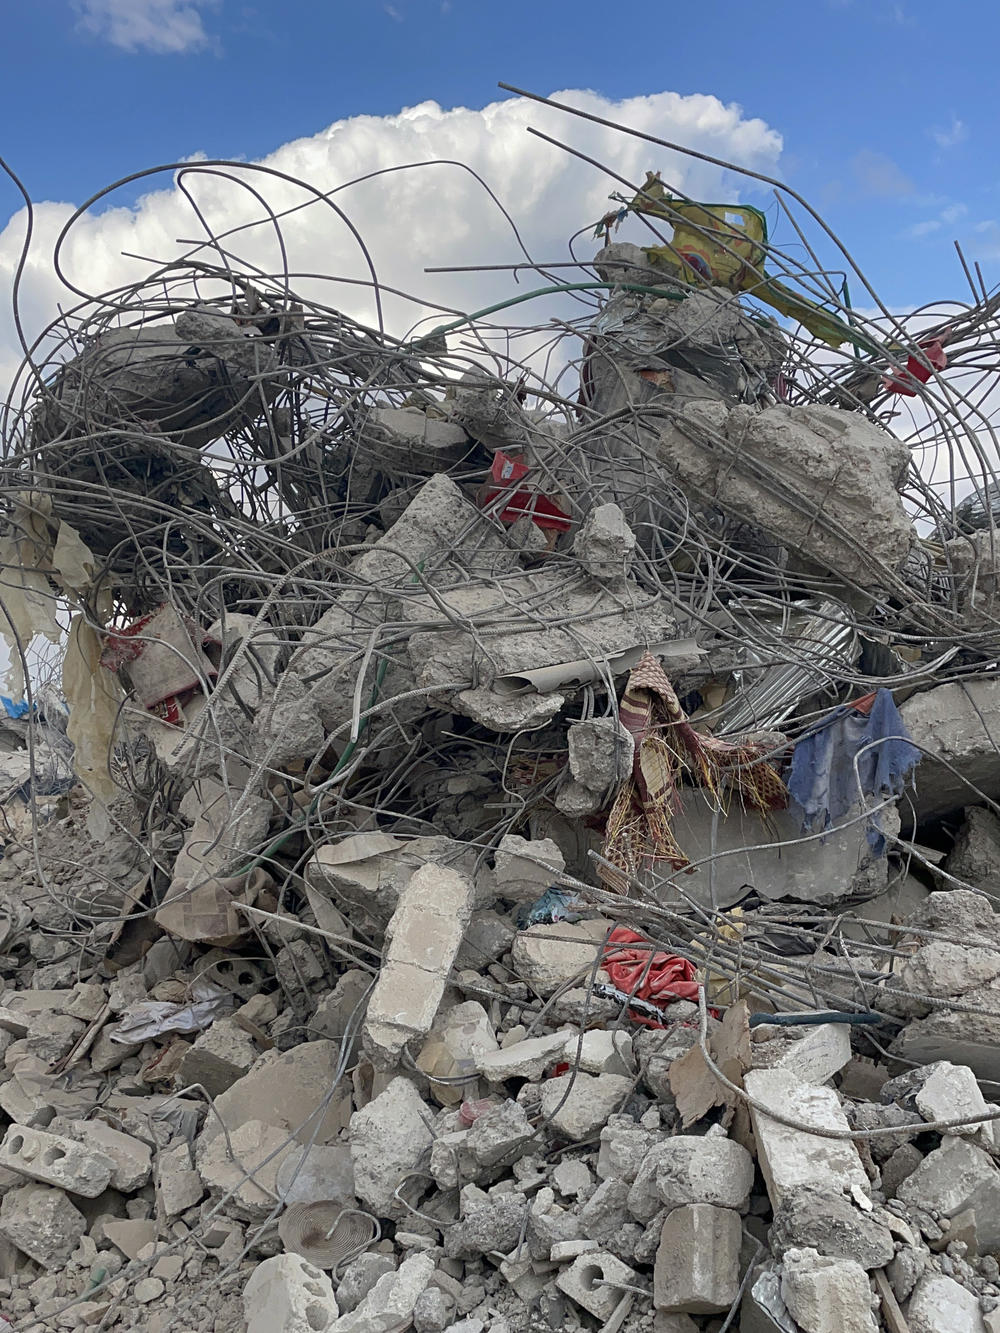 Personal possessions are seen on Friday in Jinderis, Syria, amid the tangle of rubble of a destroyed building.